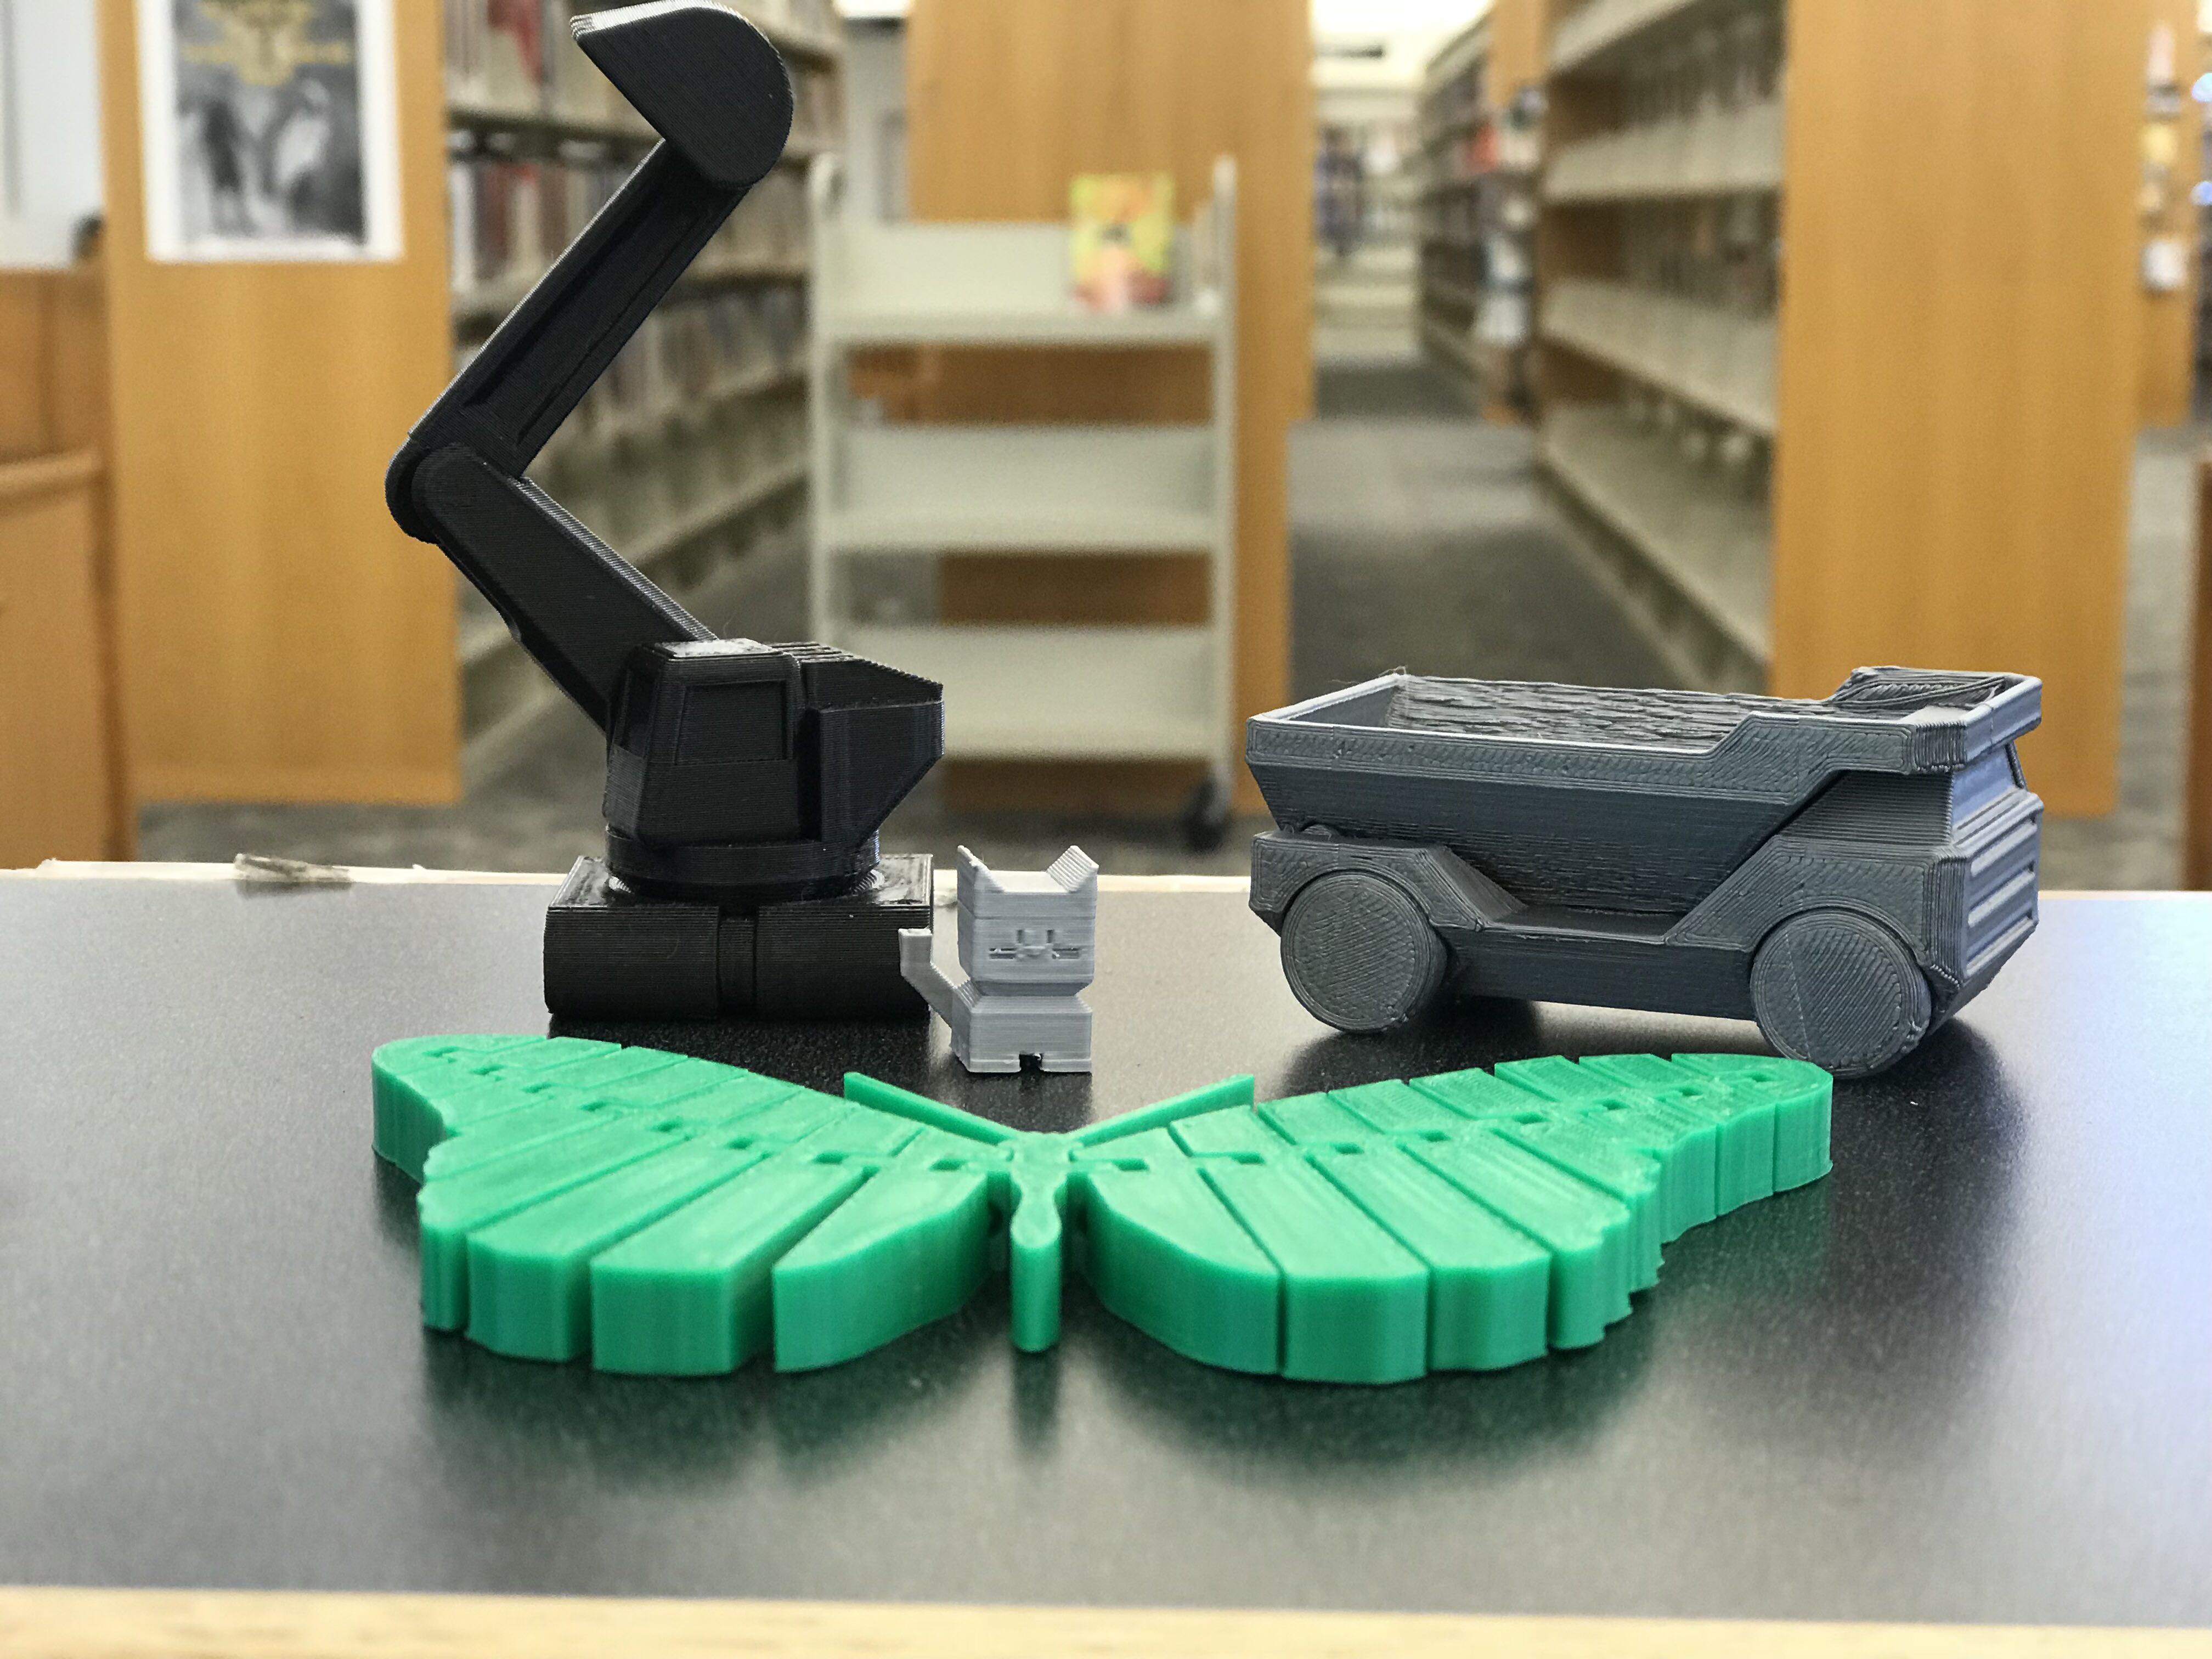 3D printed objects at Sienna Library